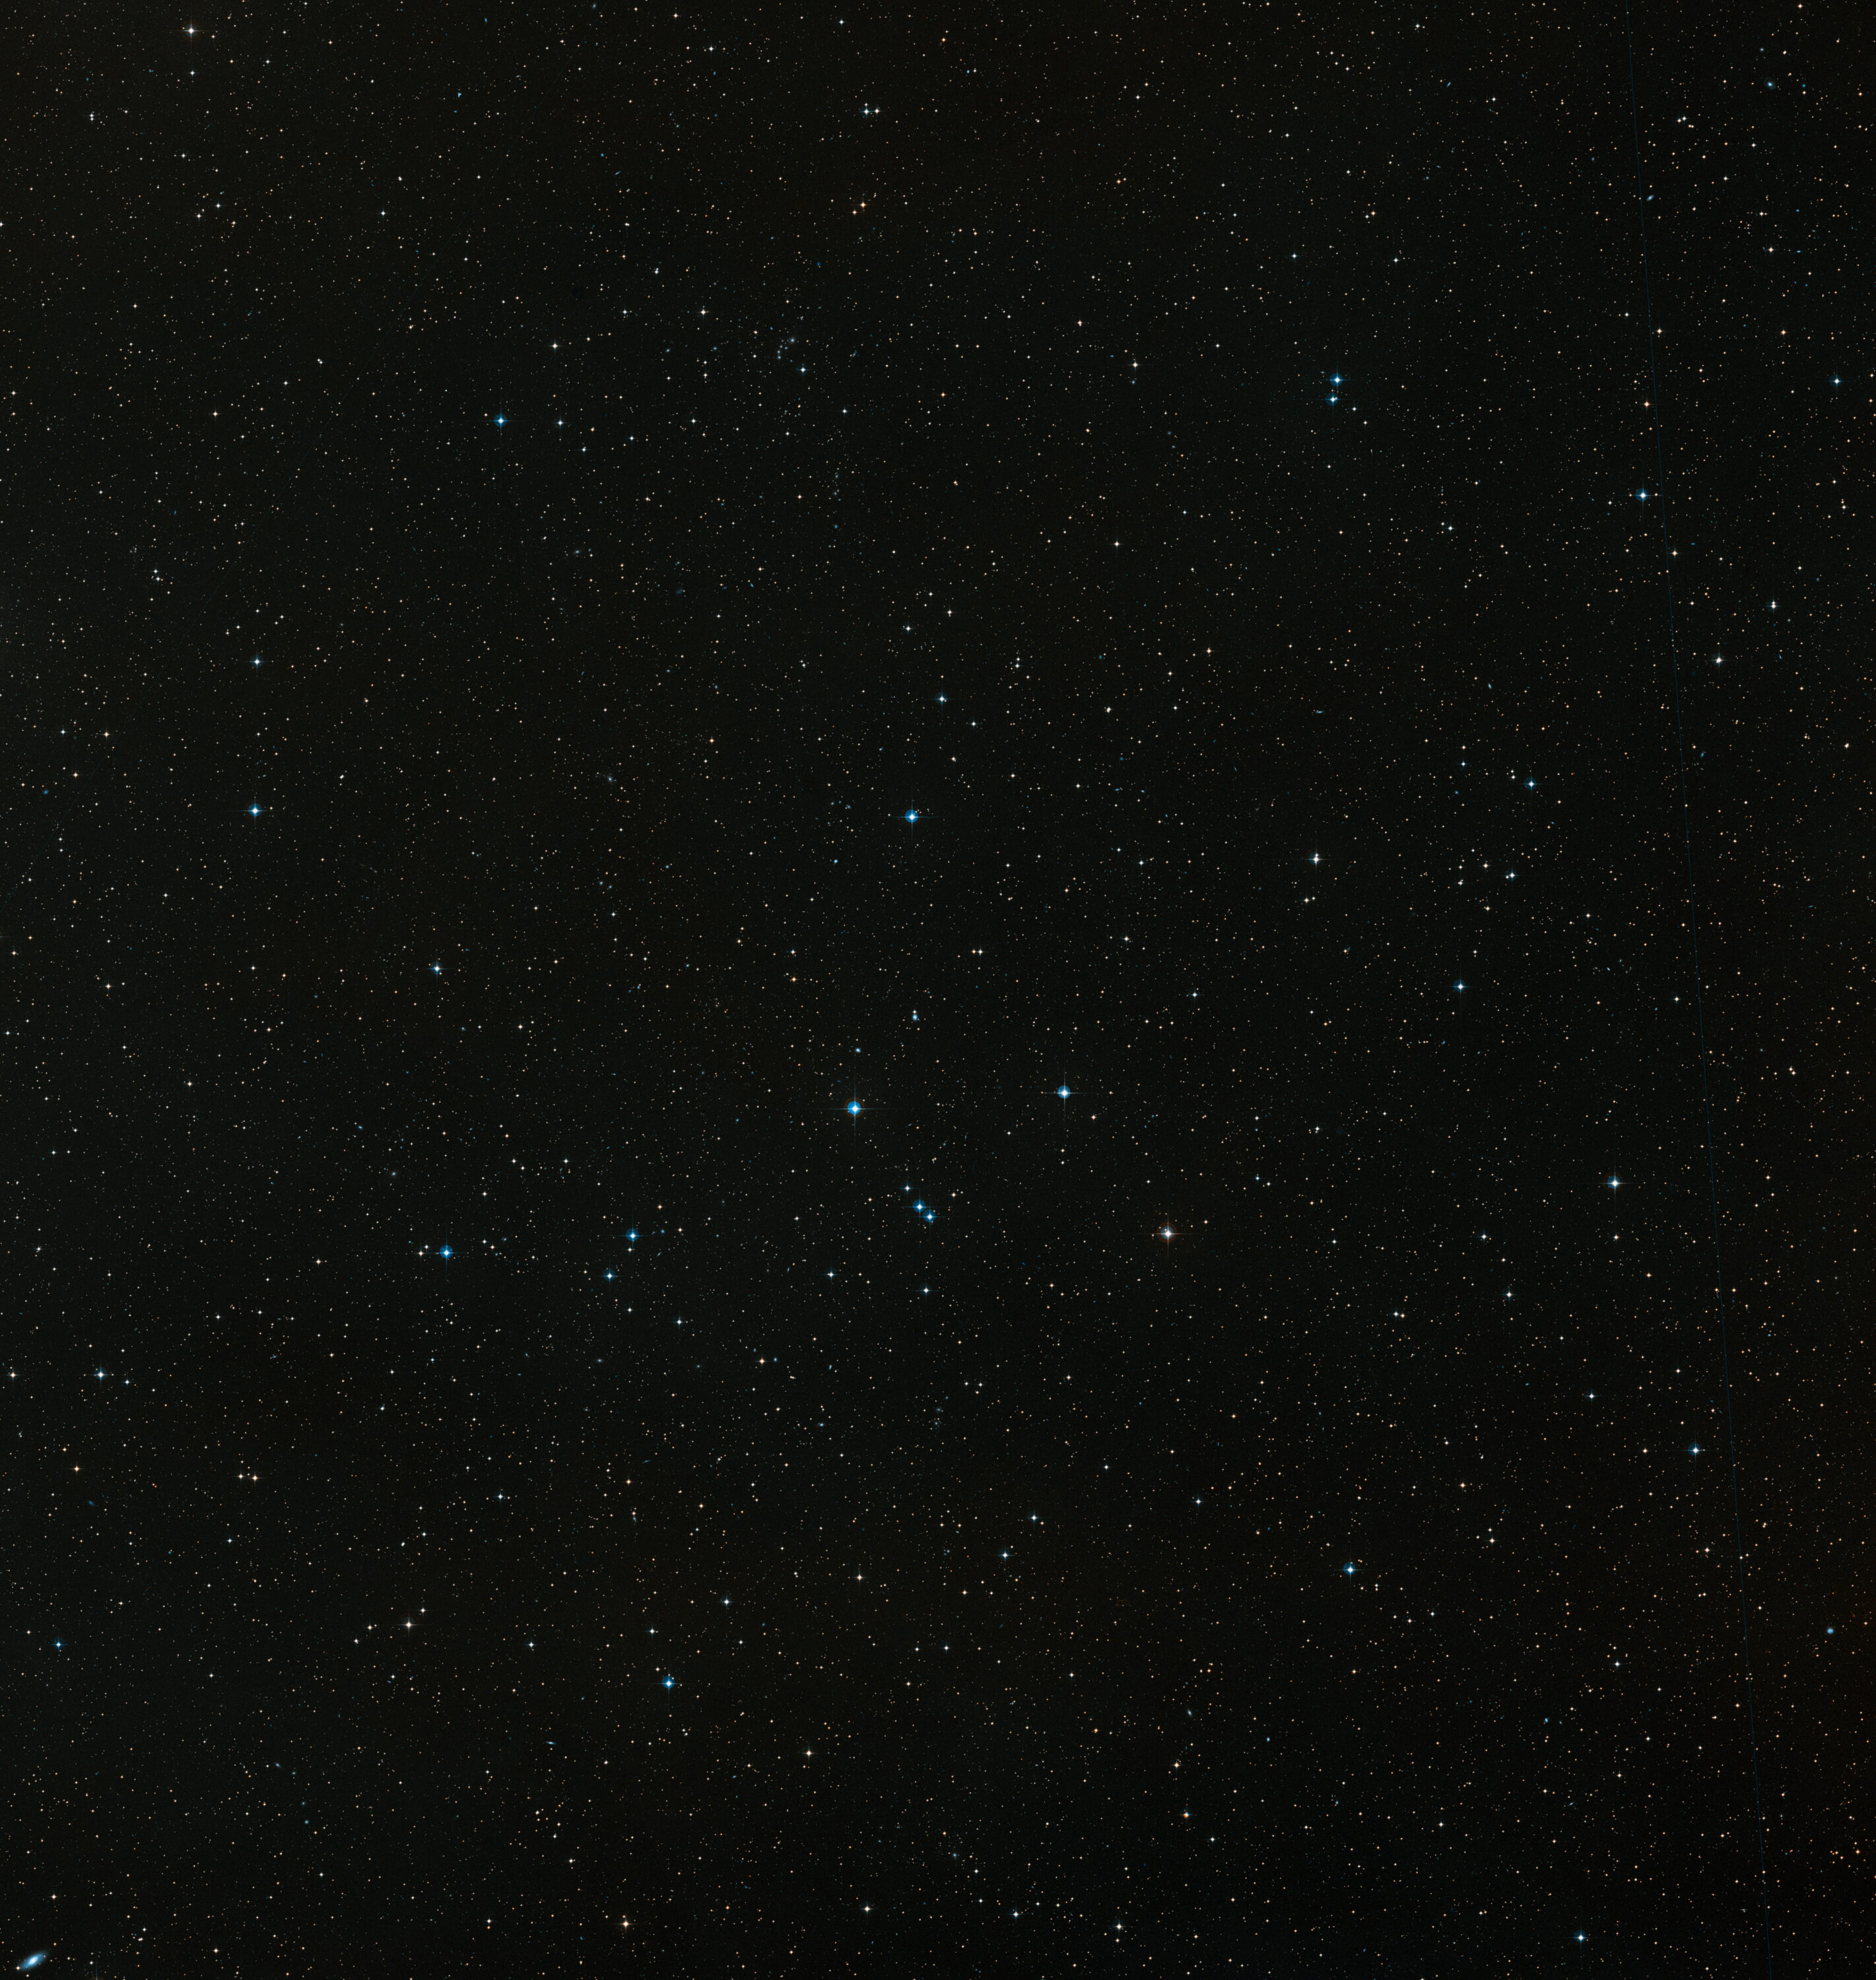 This image is a colour composite made from exposures from the Digitized Sky Survey 2 (DSS2). The field of view is 2.8 x 2.9 degrees. Credit: Digitized Sky Survey 2 and ESA/Hubble. ESA/Hubble and Digitized Sky Survey 2. Acknowledgement: Davide De Martin (ESA/Hubble)